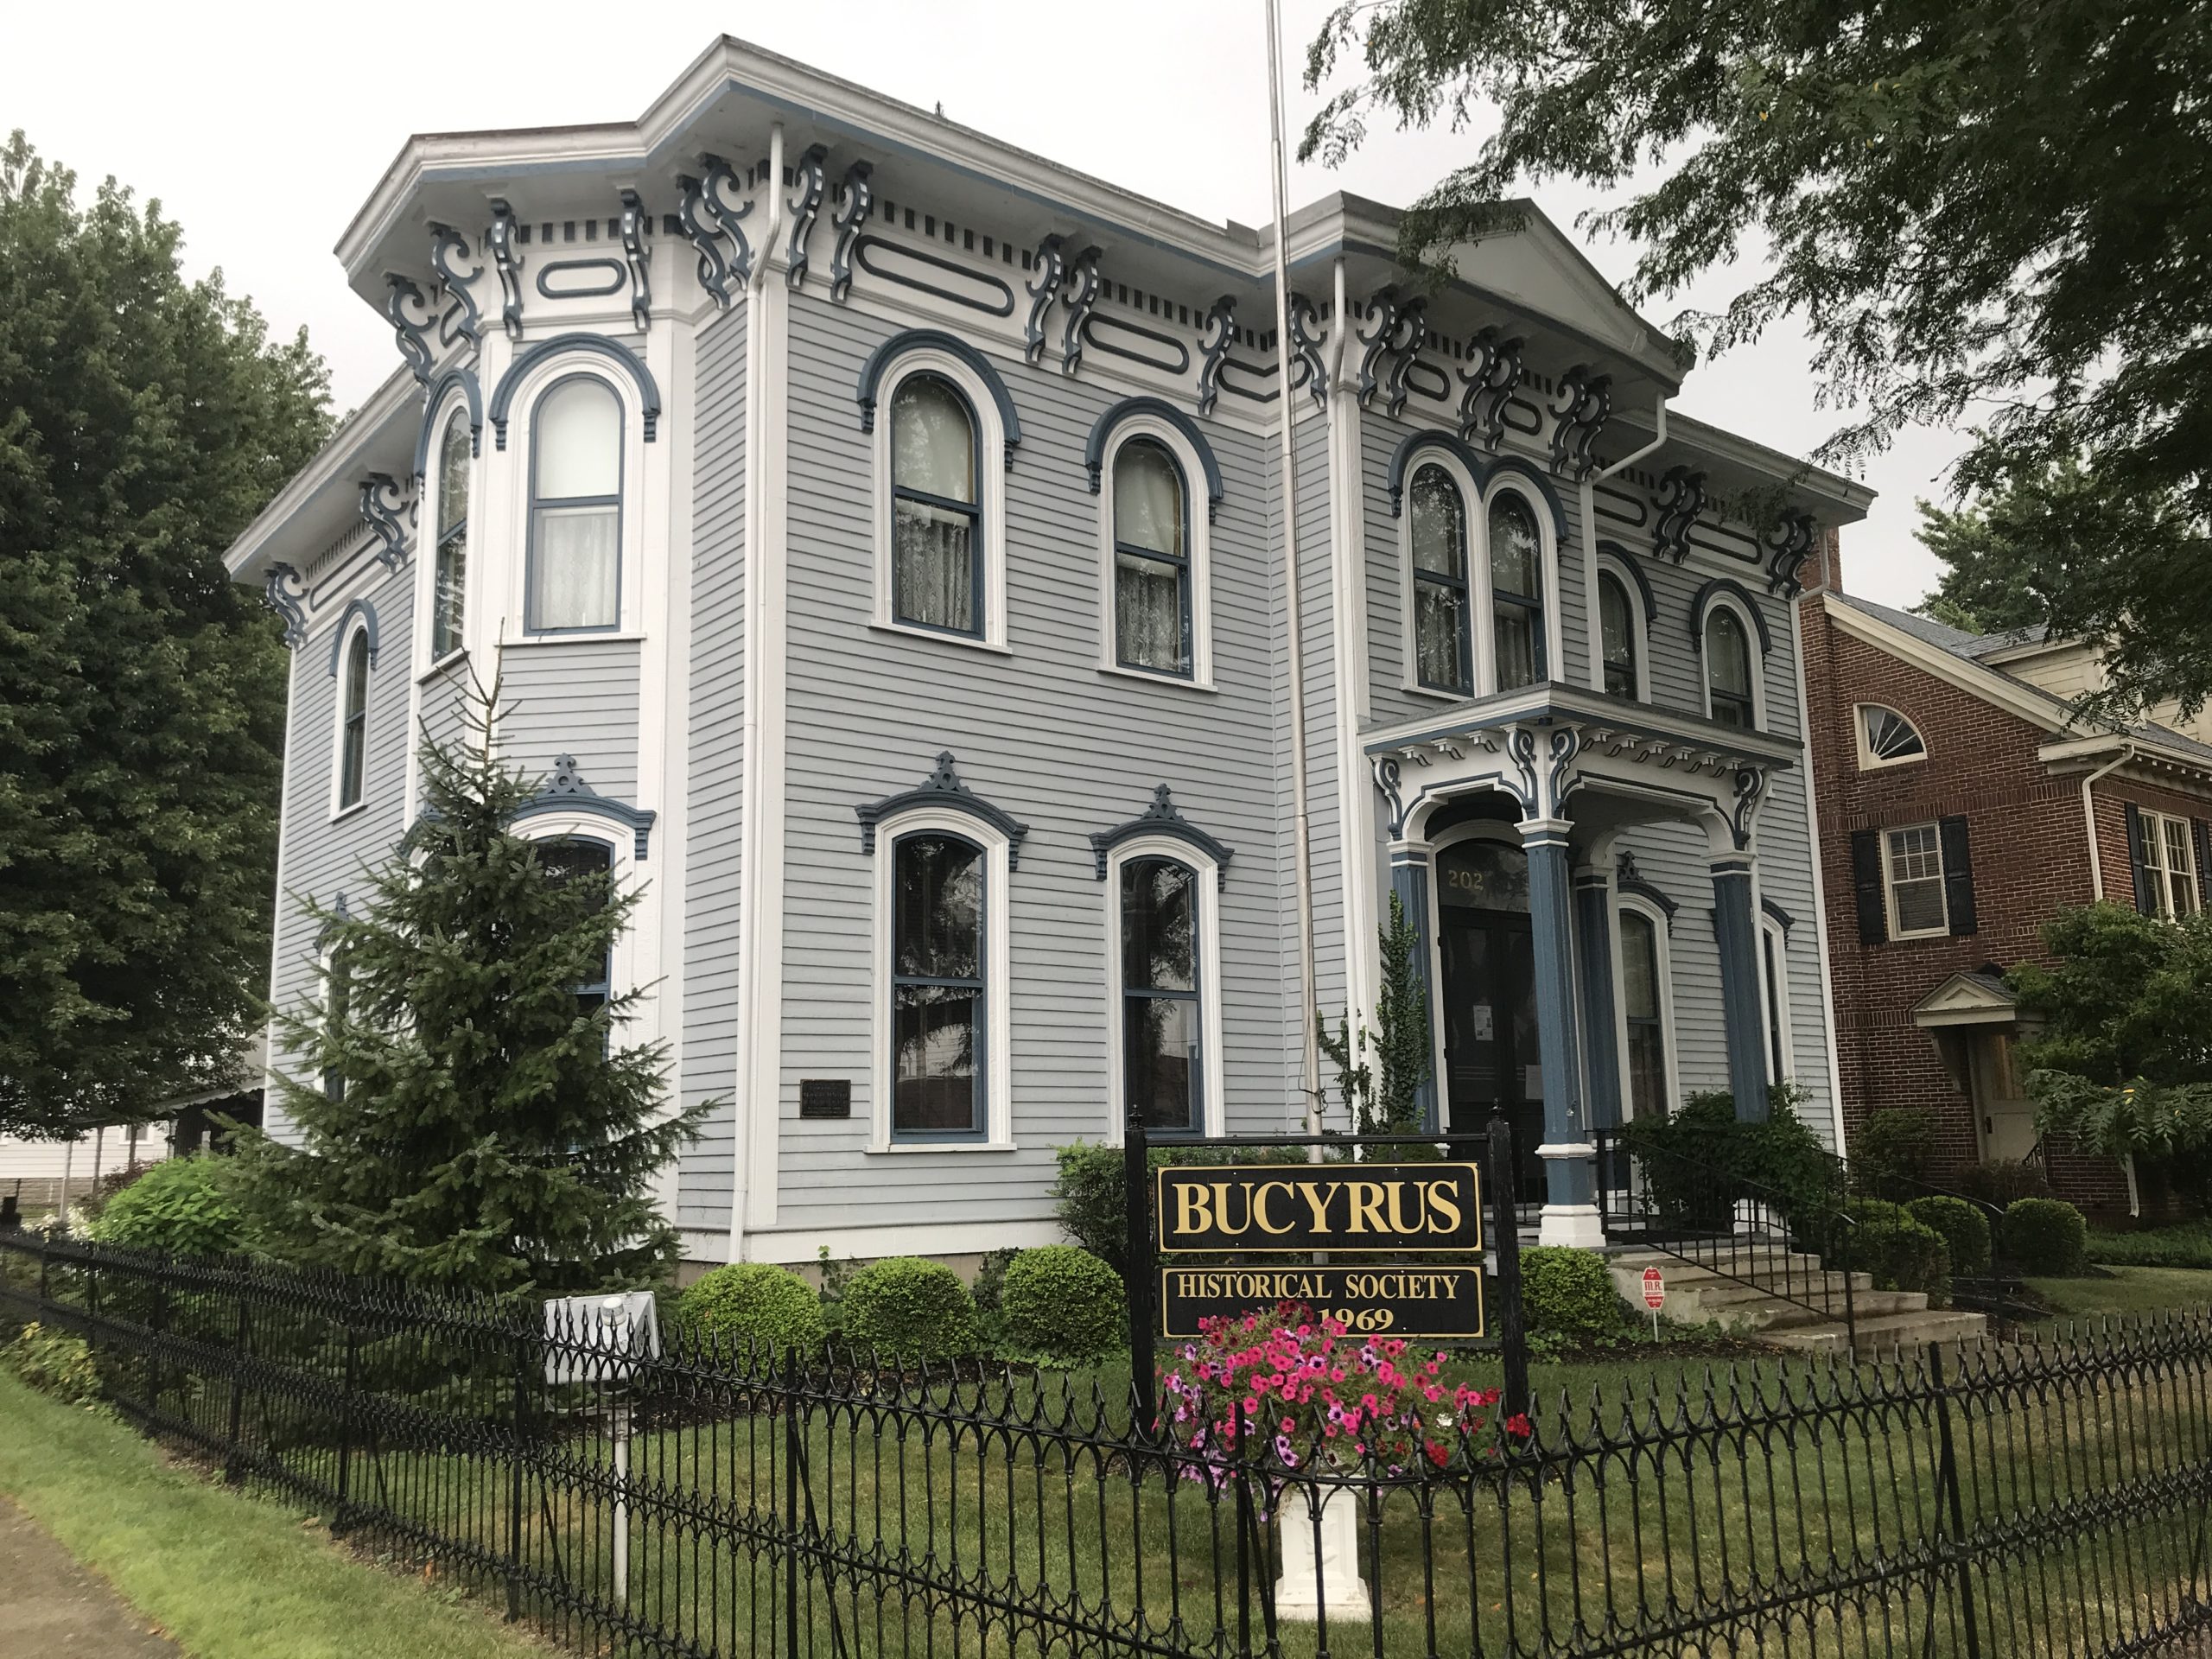 Bucyrus Historical Society - Bucyrus, OH